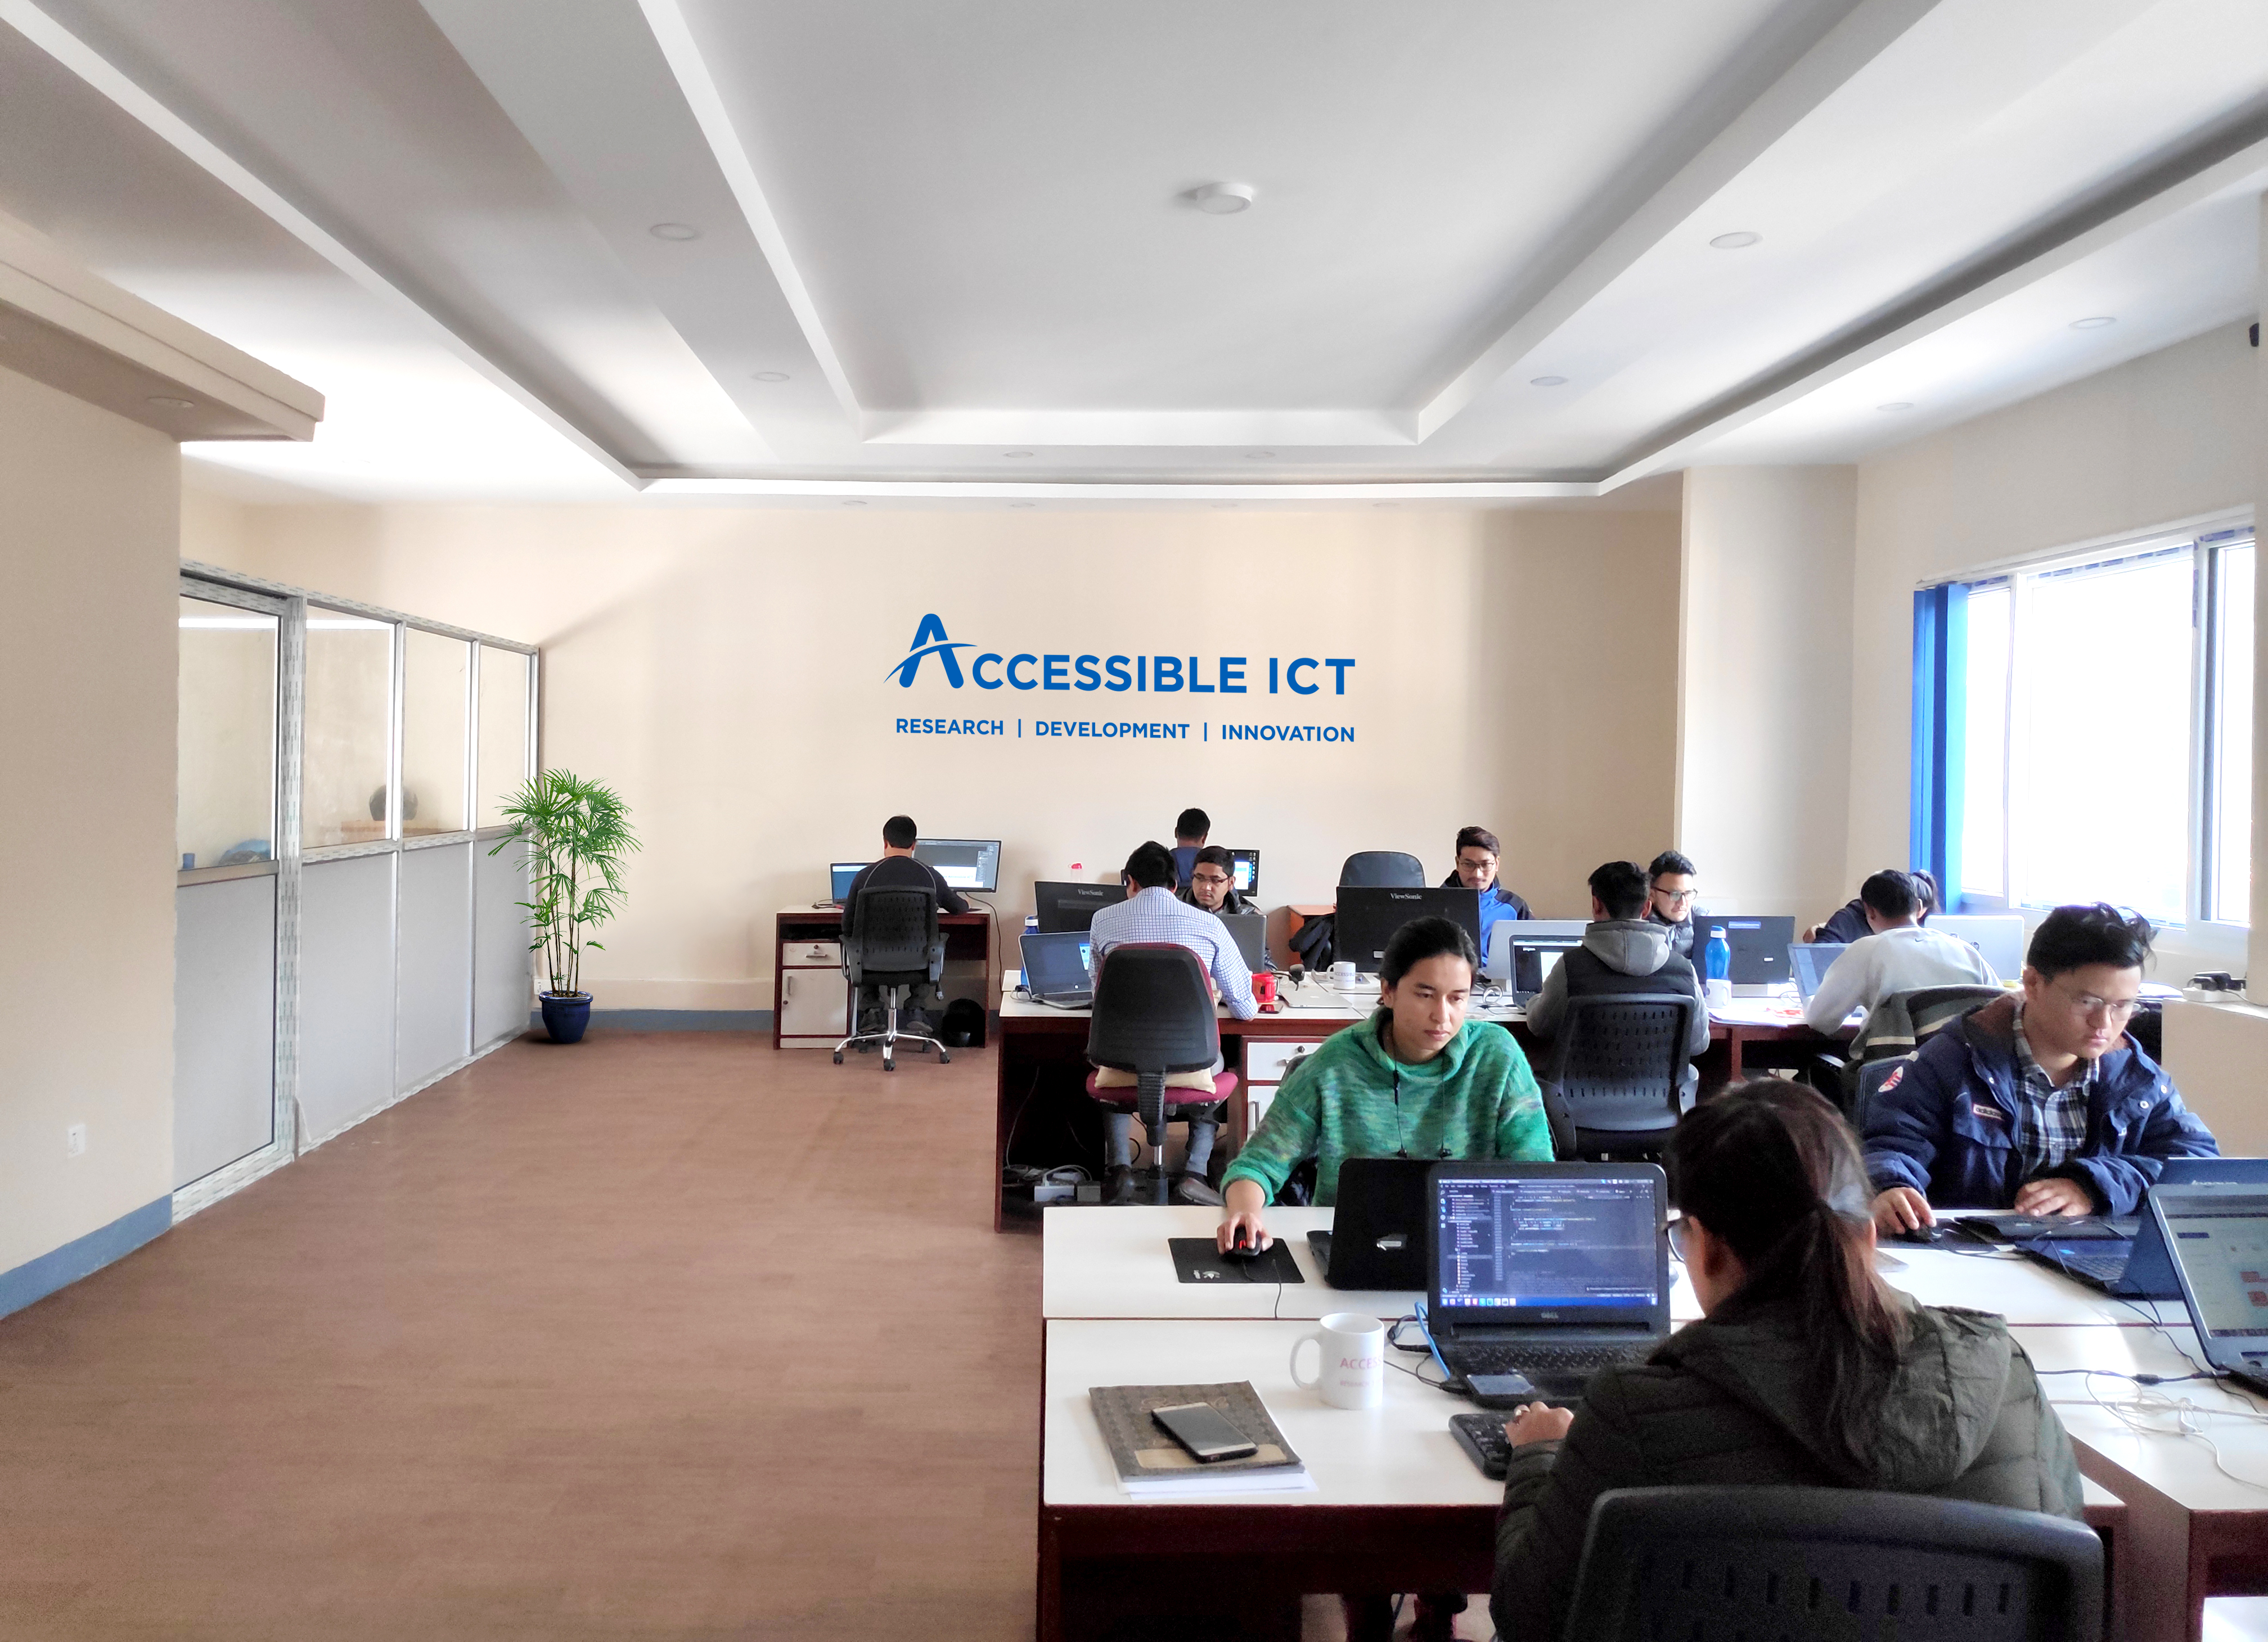 Accessible ICT